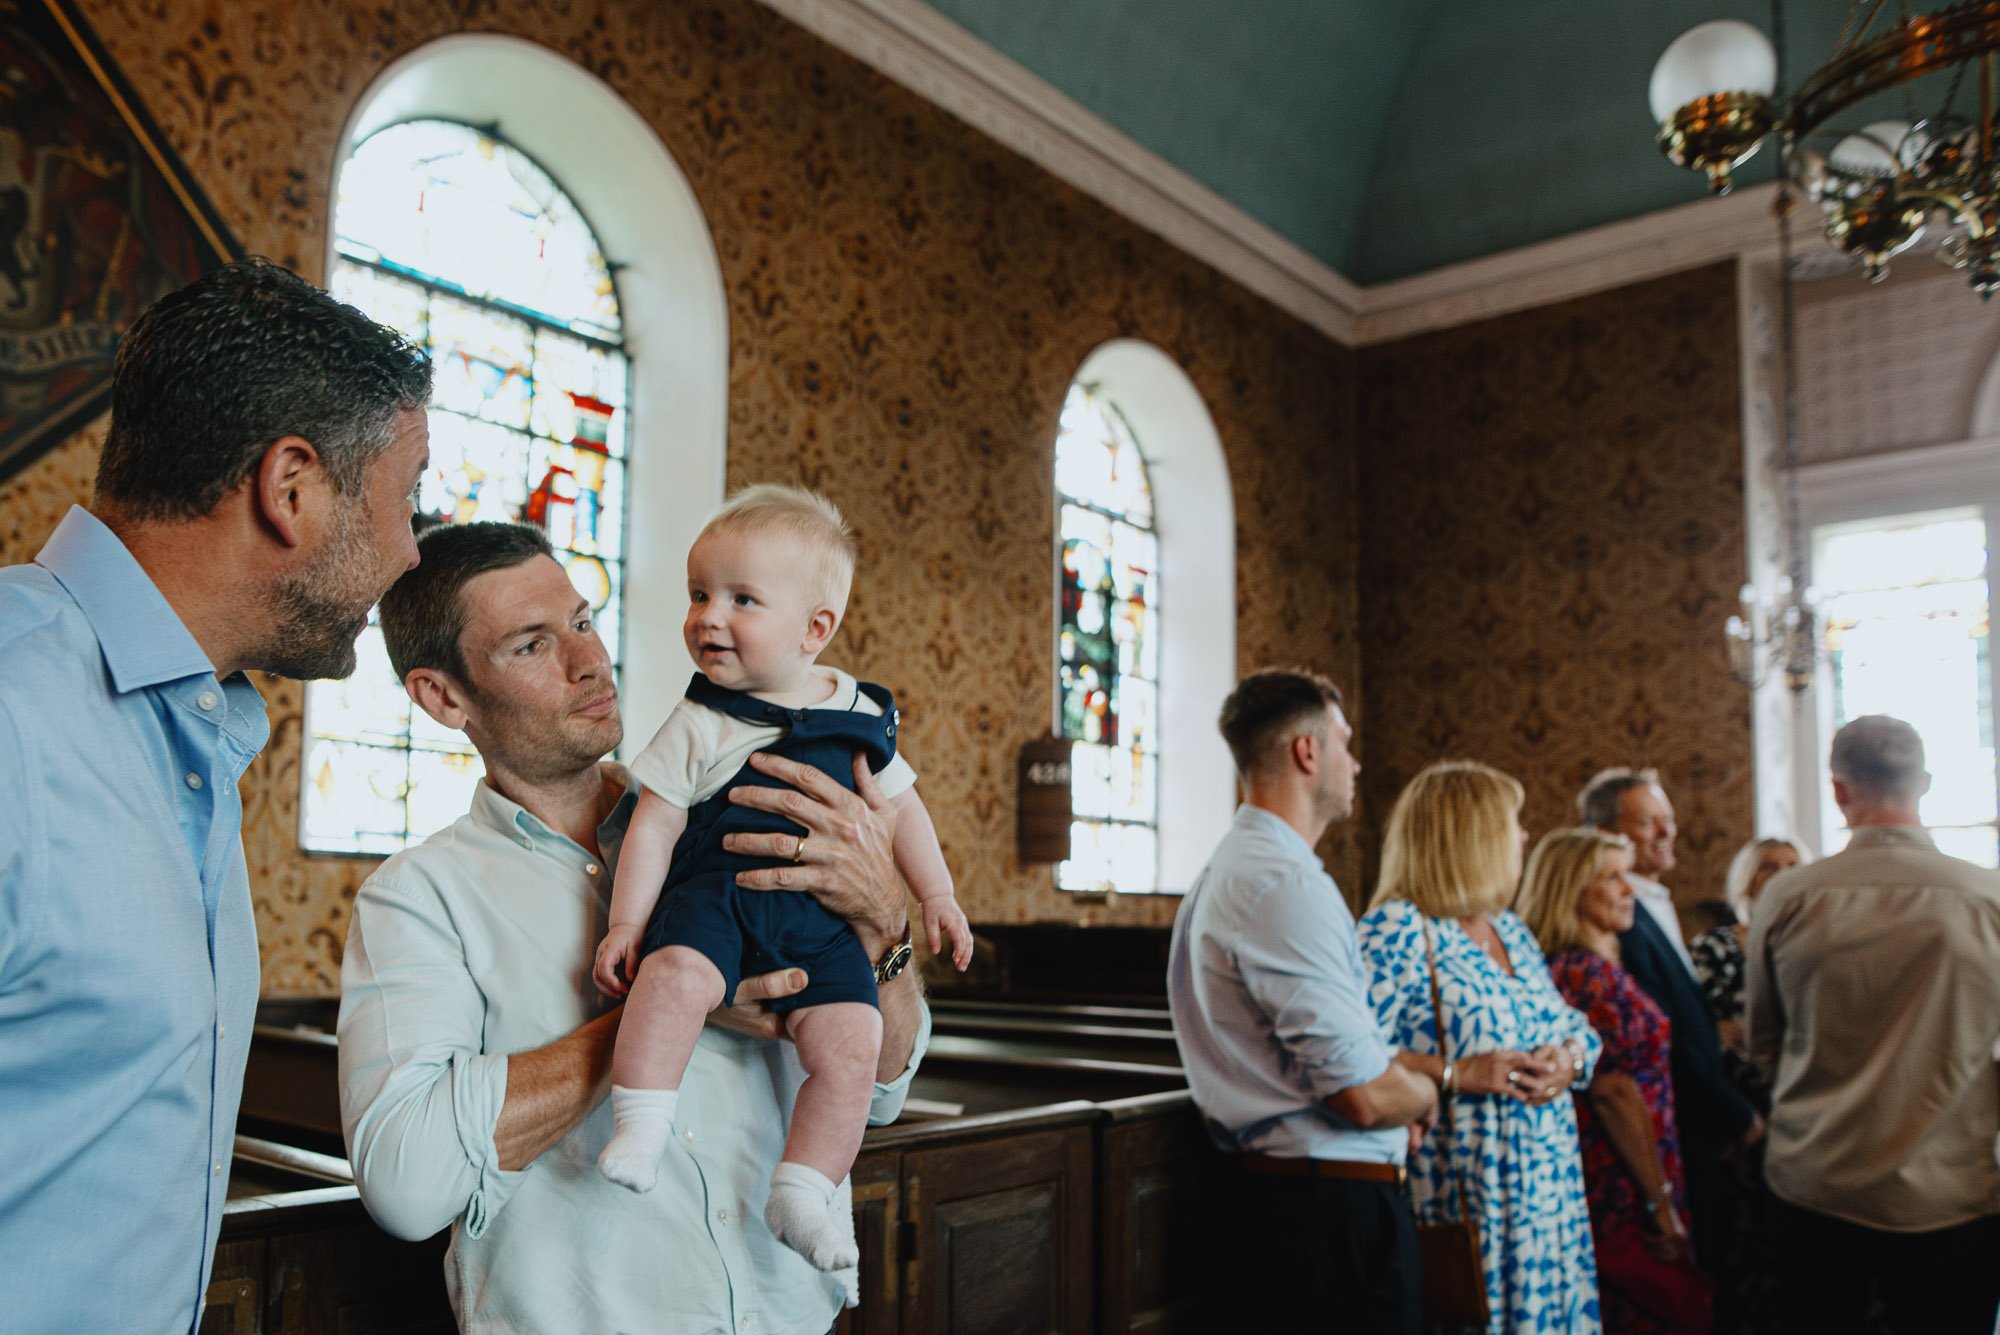 brighton-christening-photography-sussex-family-photographer-boy-held-by-dad-in-church-lewes.jpg